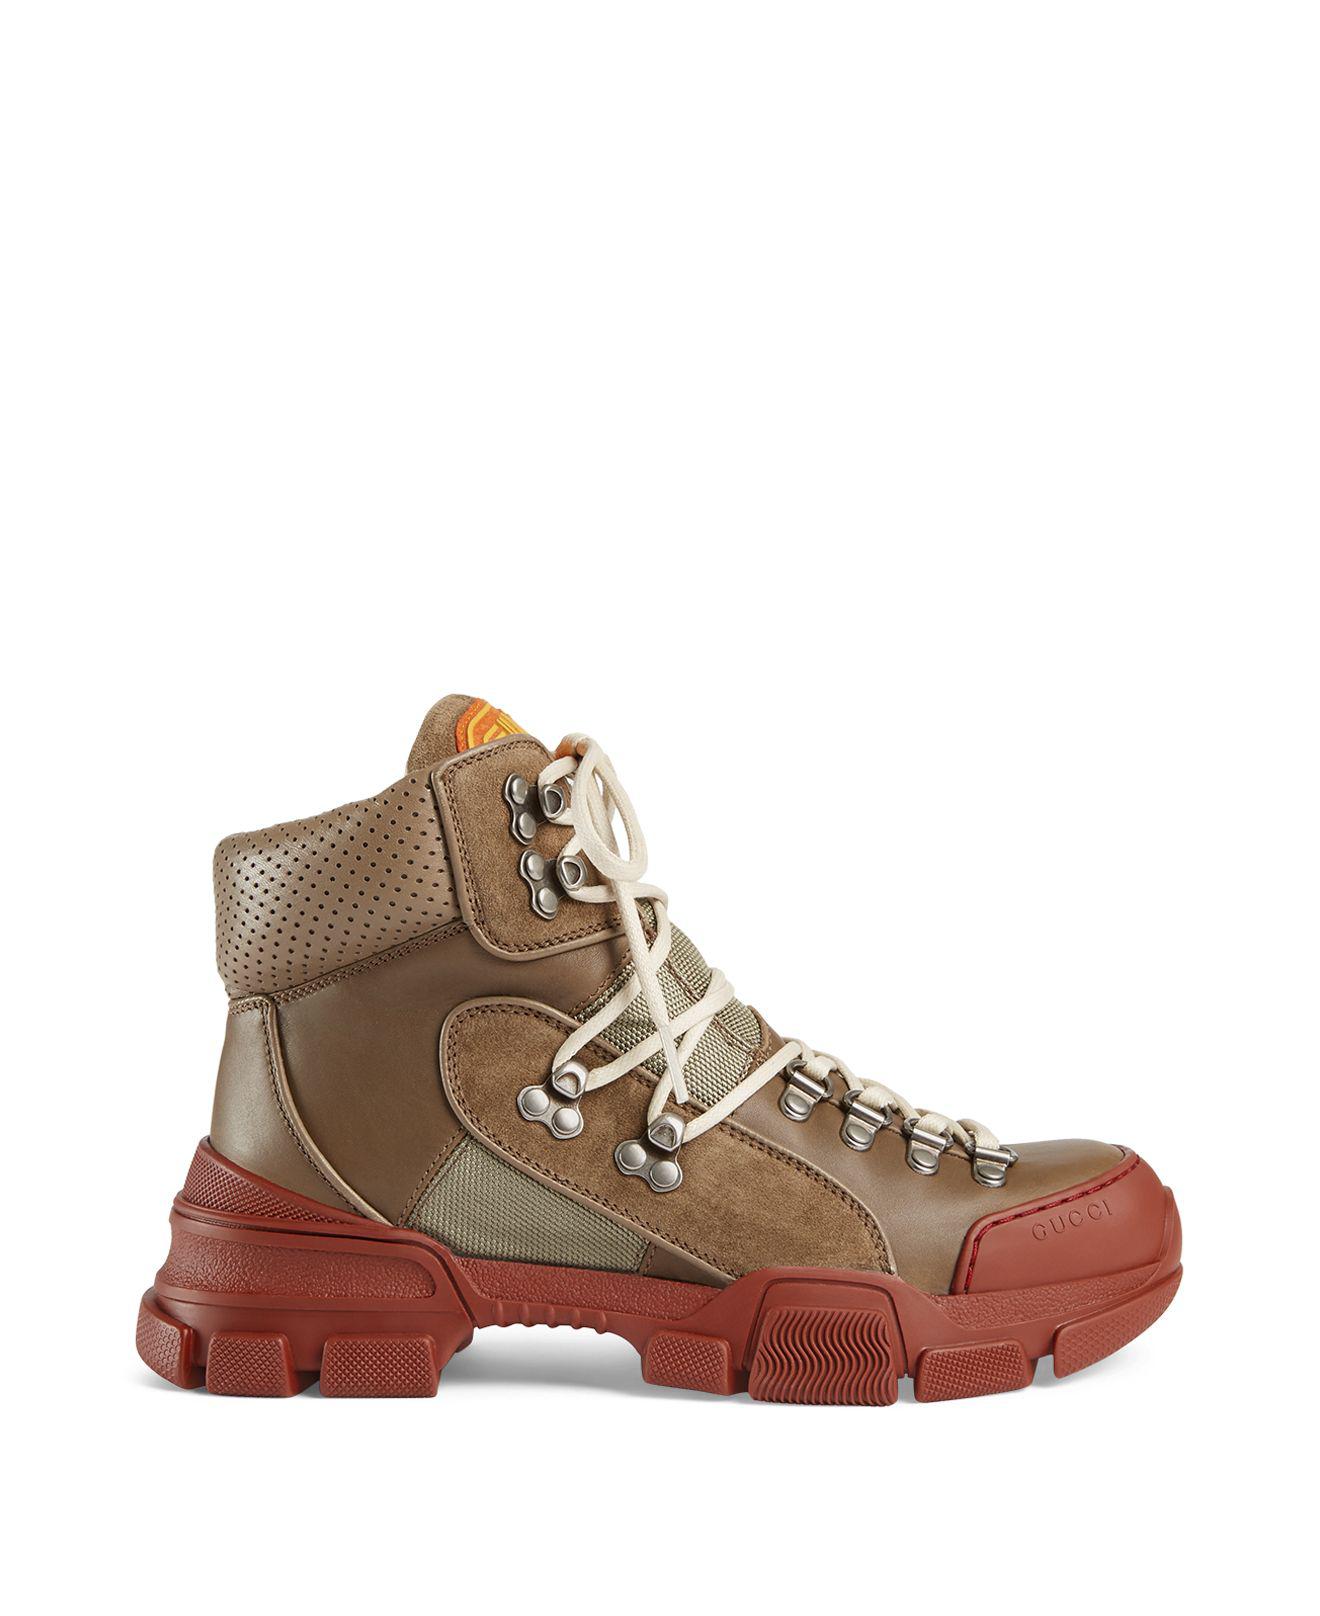 gucci hiking boots women's